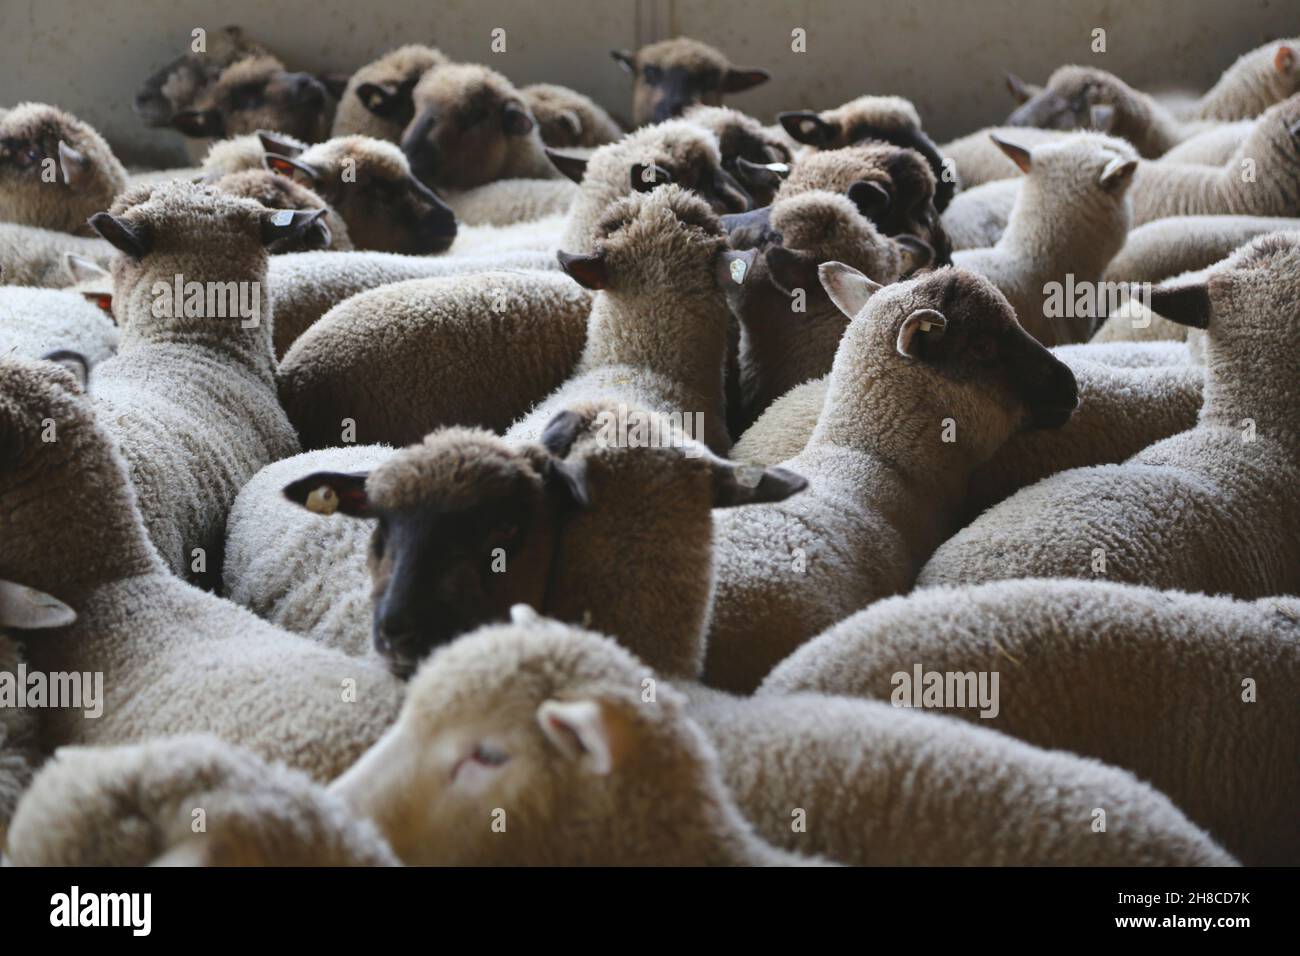 domestic sheep (Ovis ammon f. aries), lambs crowded together in the slaughterhouse Stock Photo